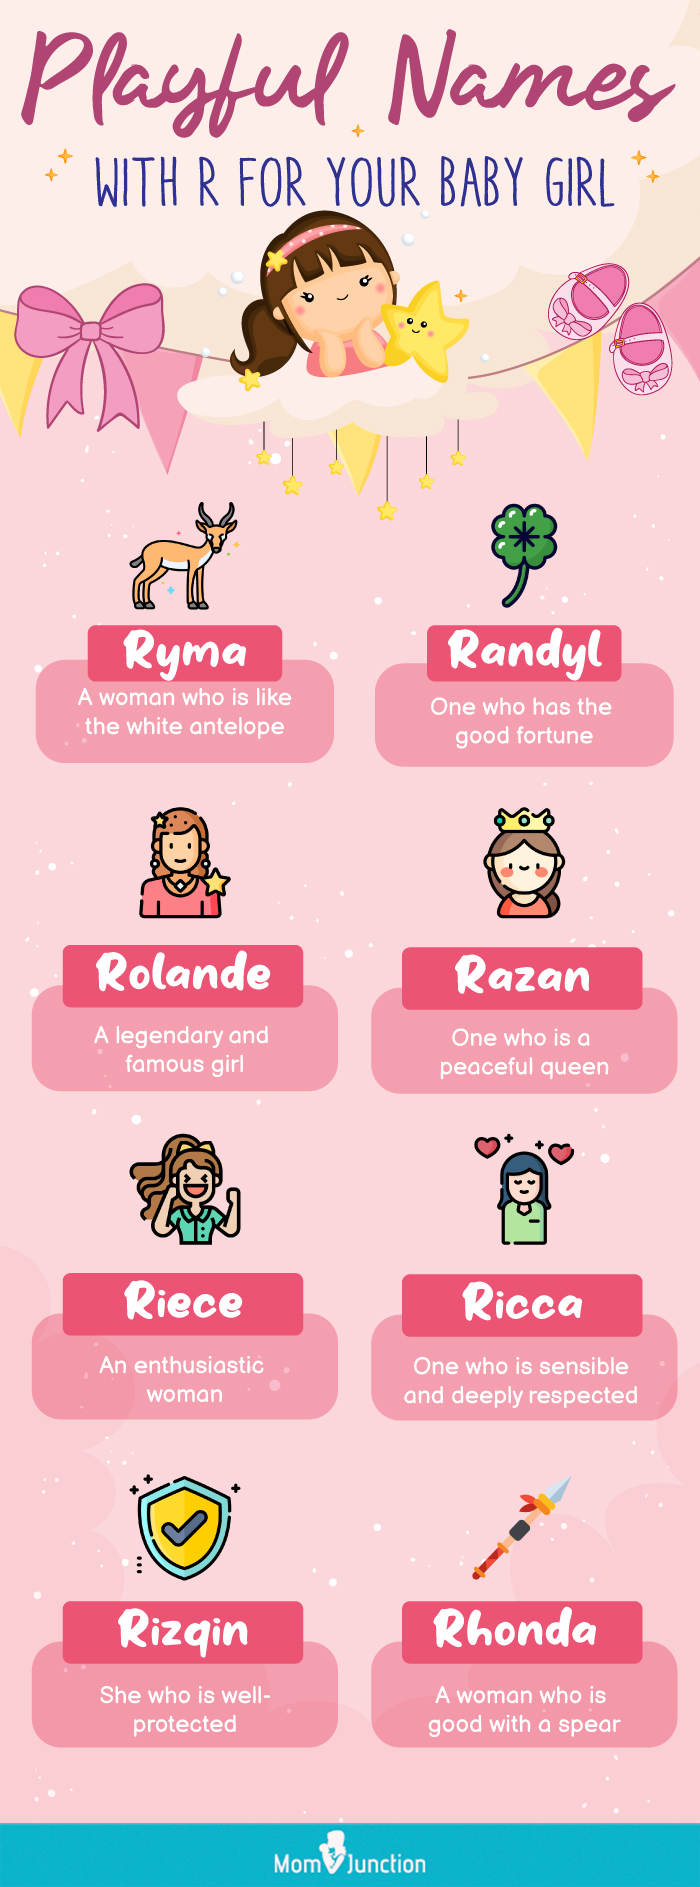 playful names with r for your baby girl (infographic)